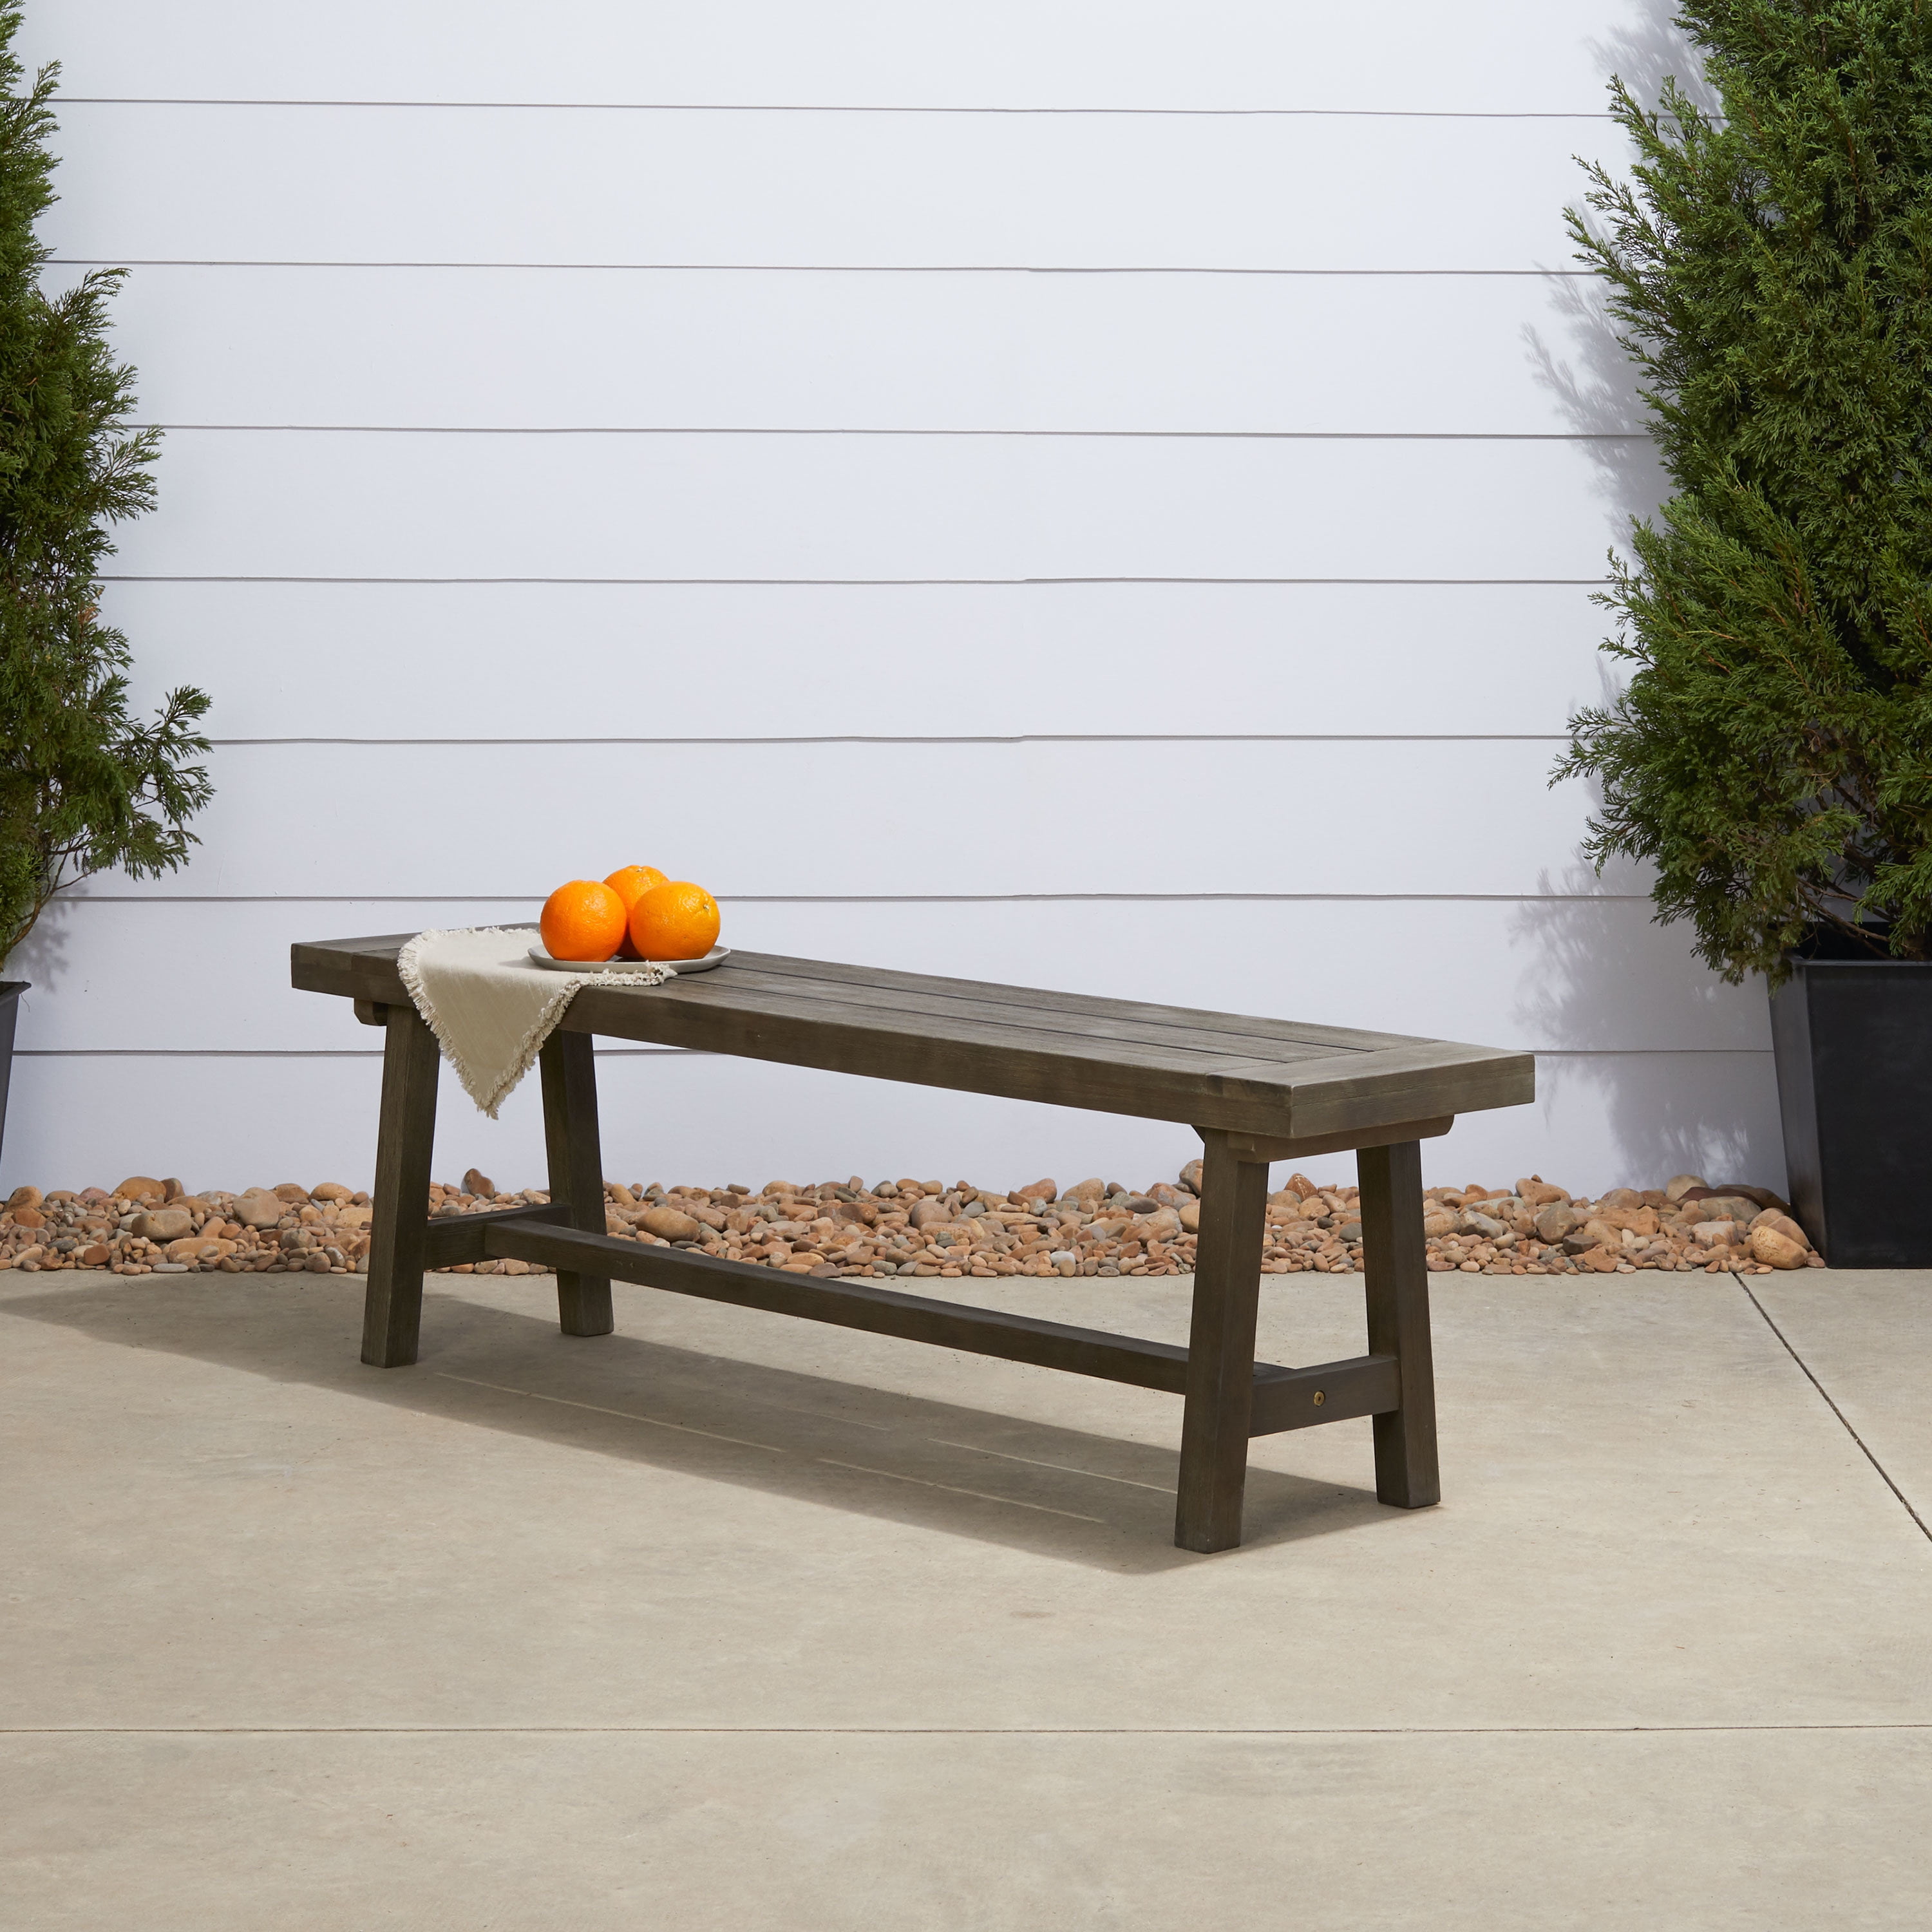 Picture of VIFAH V1820 Renaissance Outdoor Patio Dining Picnic Bench